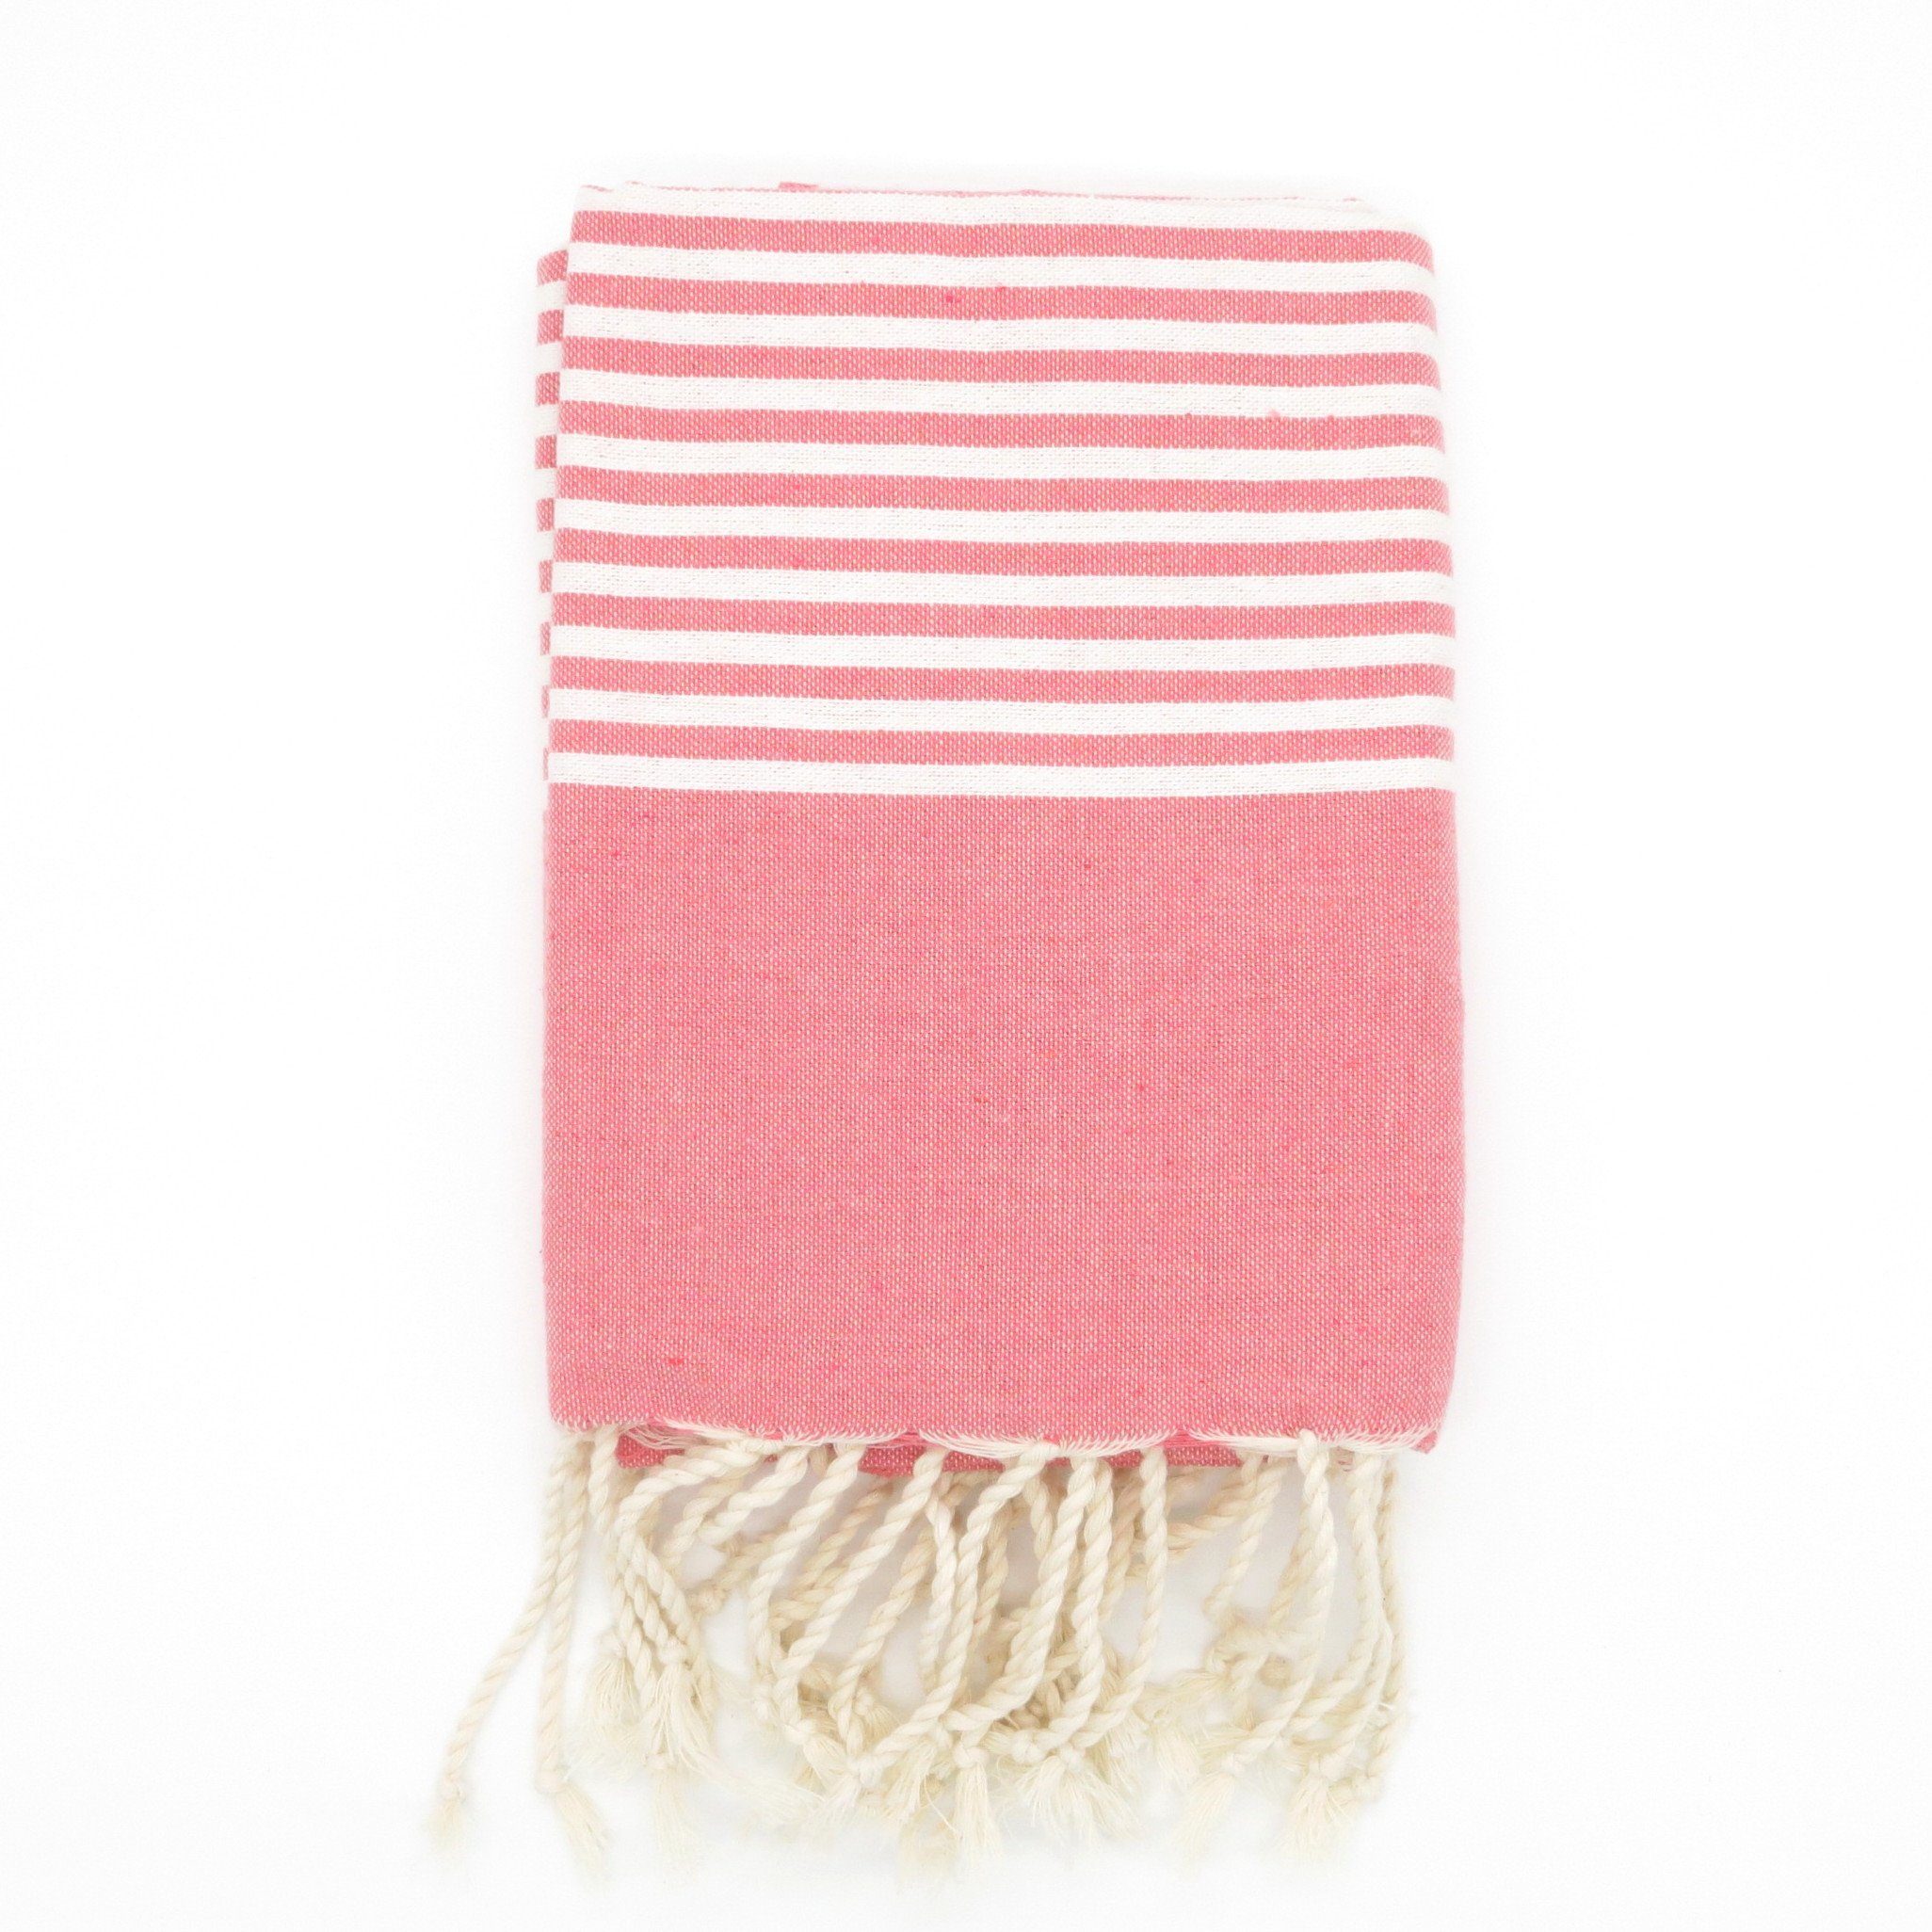 Cotonway Baumwolle recycling Hamamtuch Fala, Koralle 100% Fouta